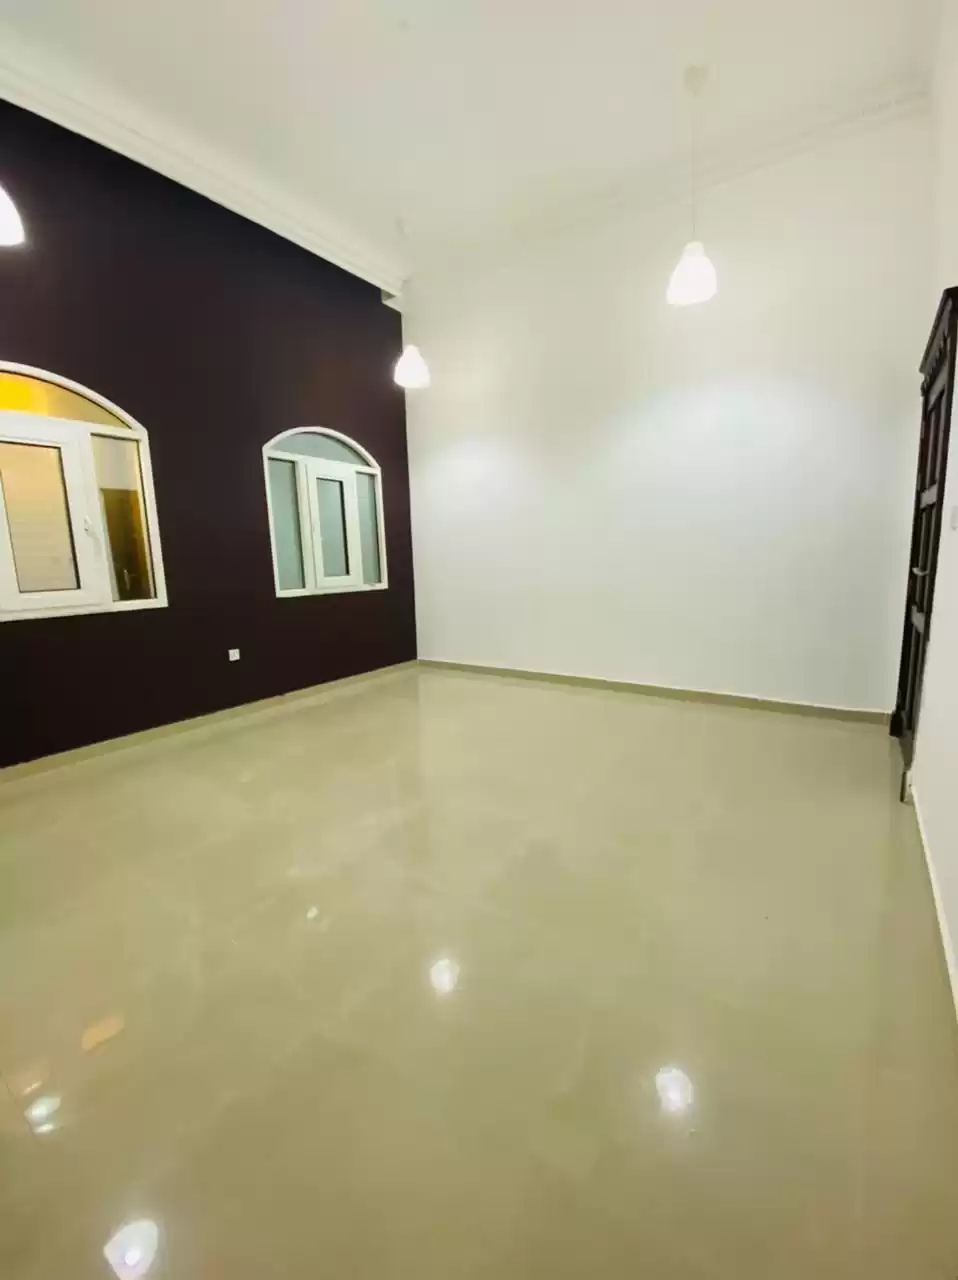 Residential Ready Property Studio S/F Apartment  for rent in Al Sadd , Doha #14348 - 1  image 